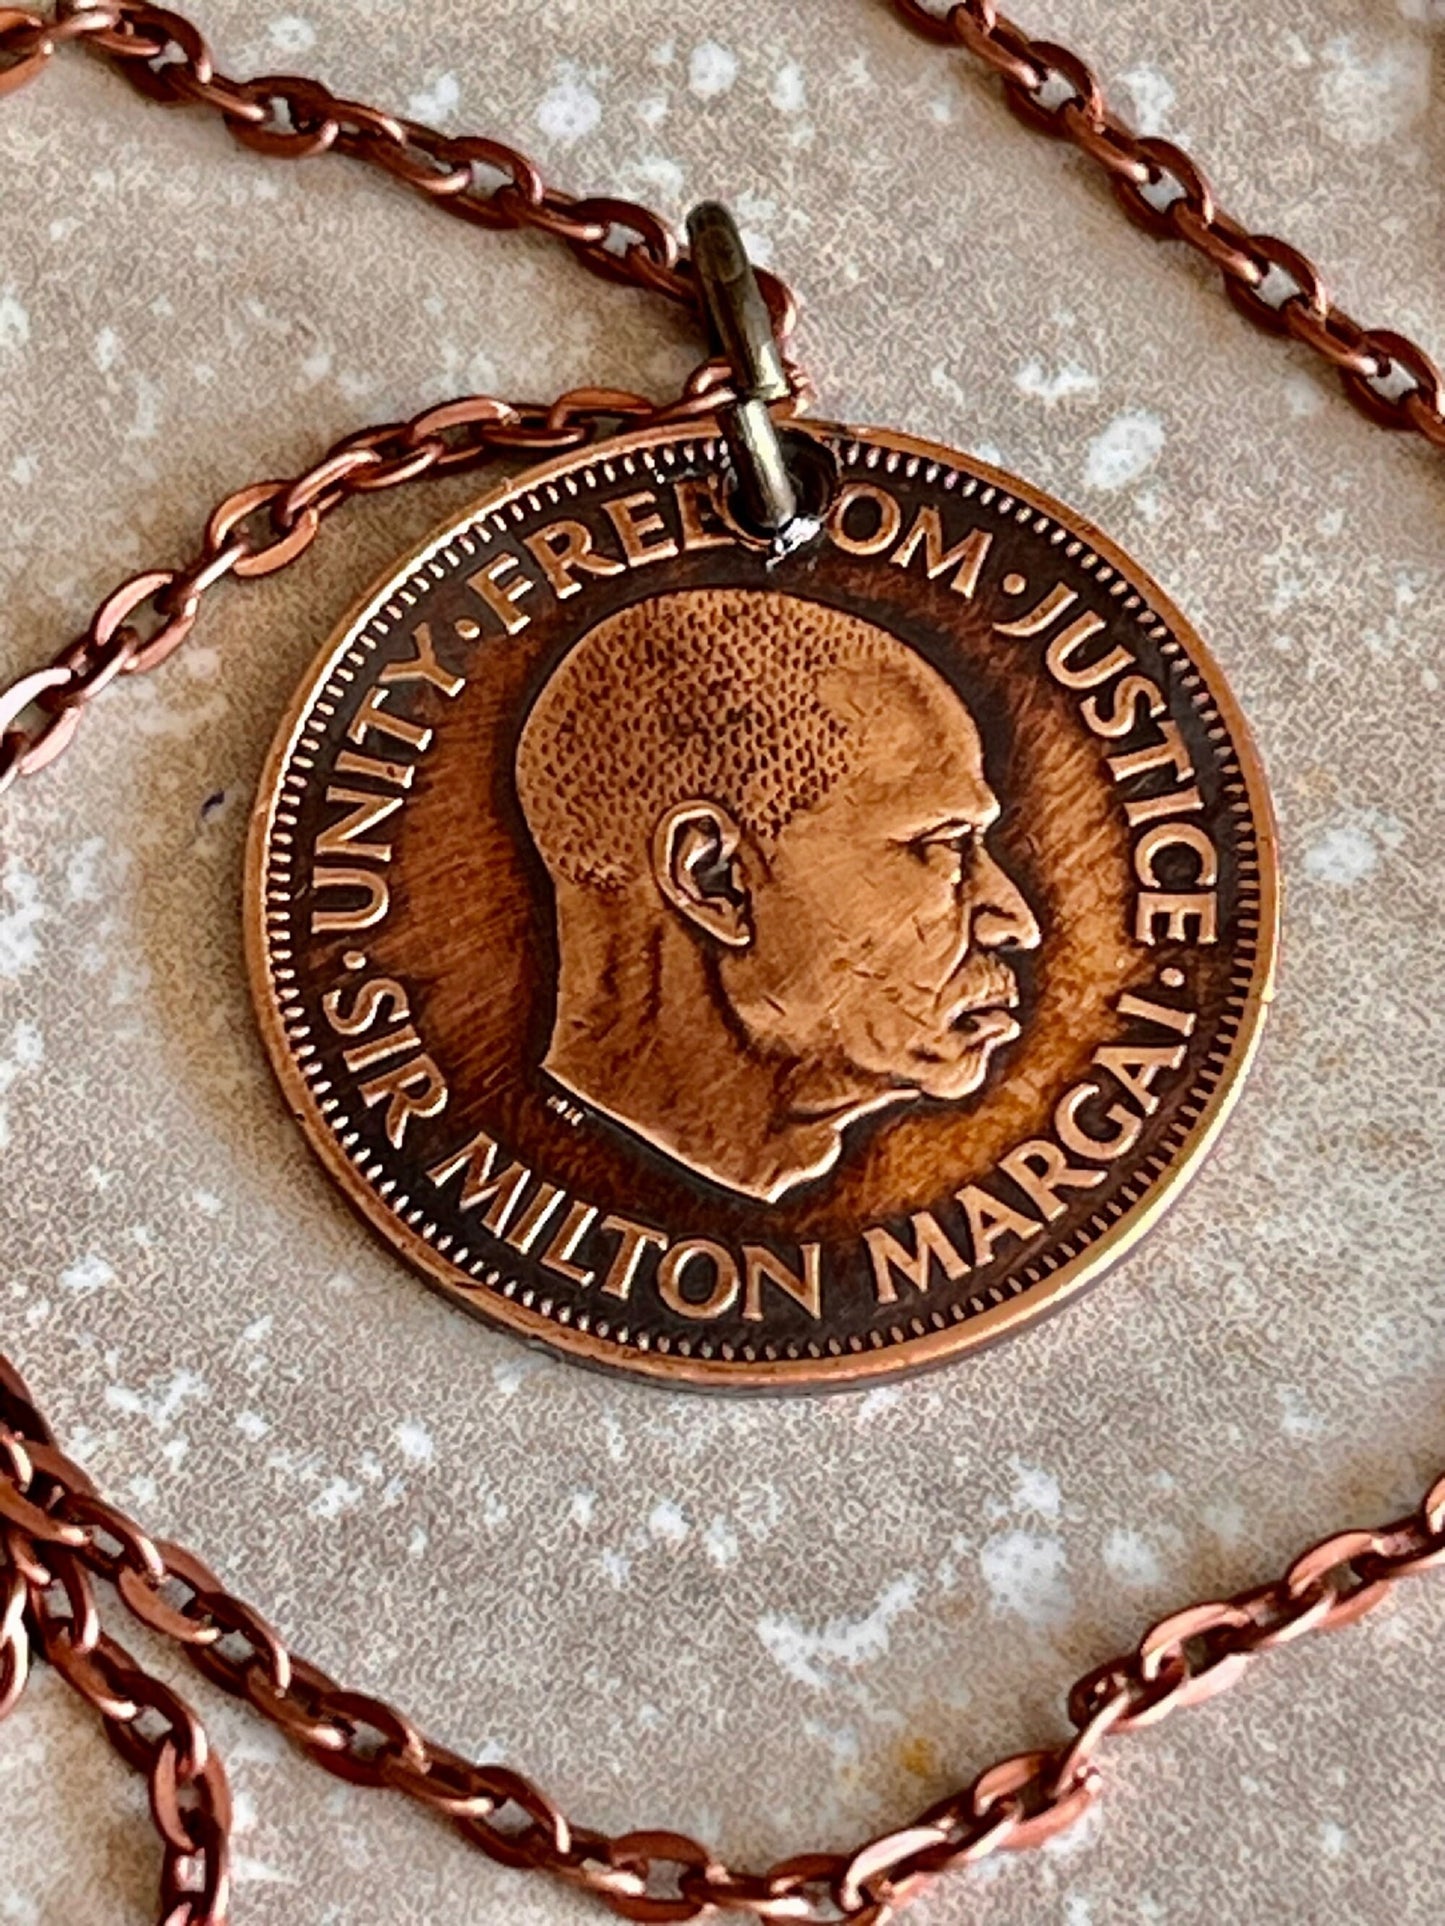 Sierra Leone Coin Pendant African 1 Cent Personal Necklace Old Vintage Handmade Jewelry Gift Friend Charm For Him Her World Coin Collector